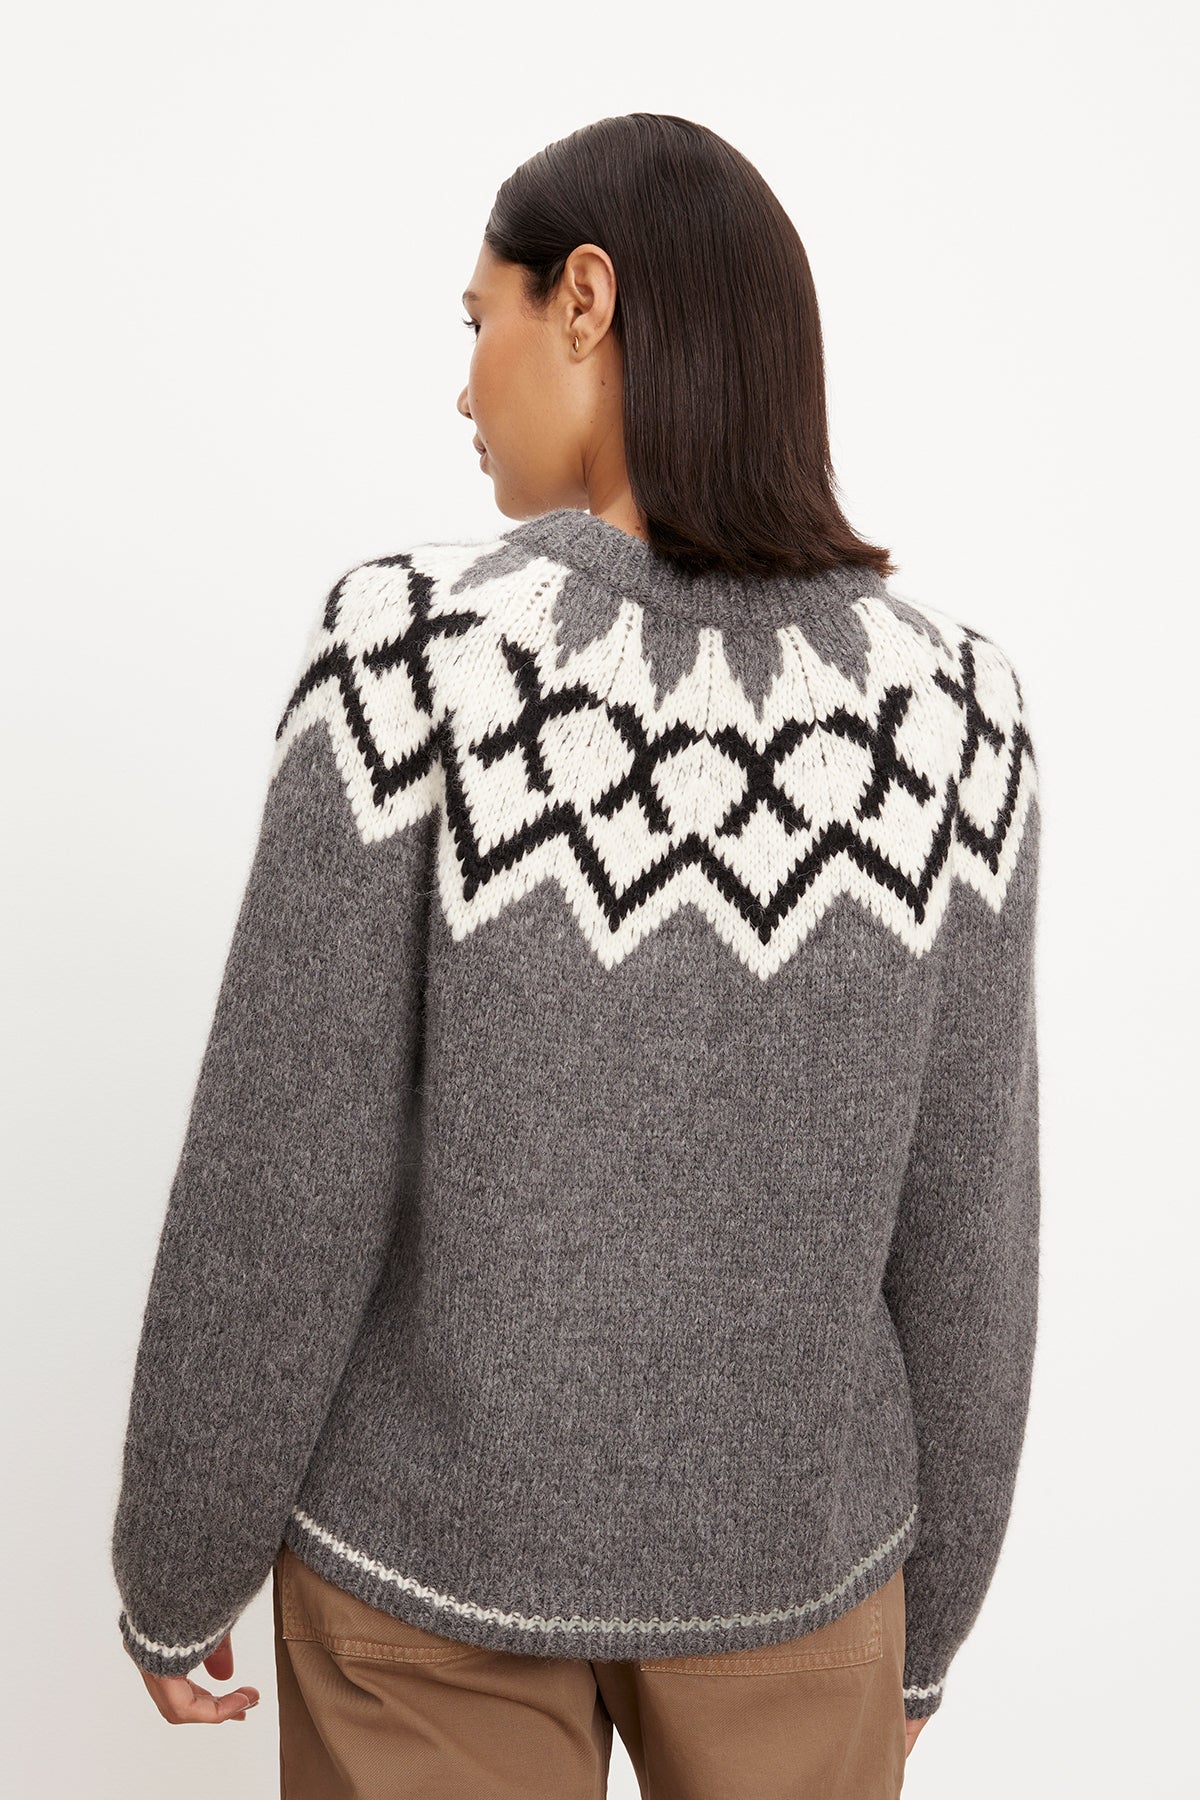   The back view of a woman wearing a Velvet by Graham & Spencer ALEXA FAIR ISLE CREW NECK SWEATER with a fair isle design. 